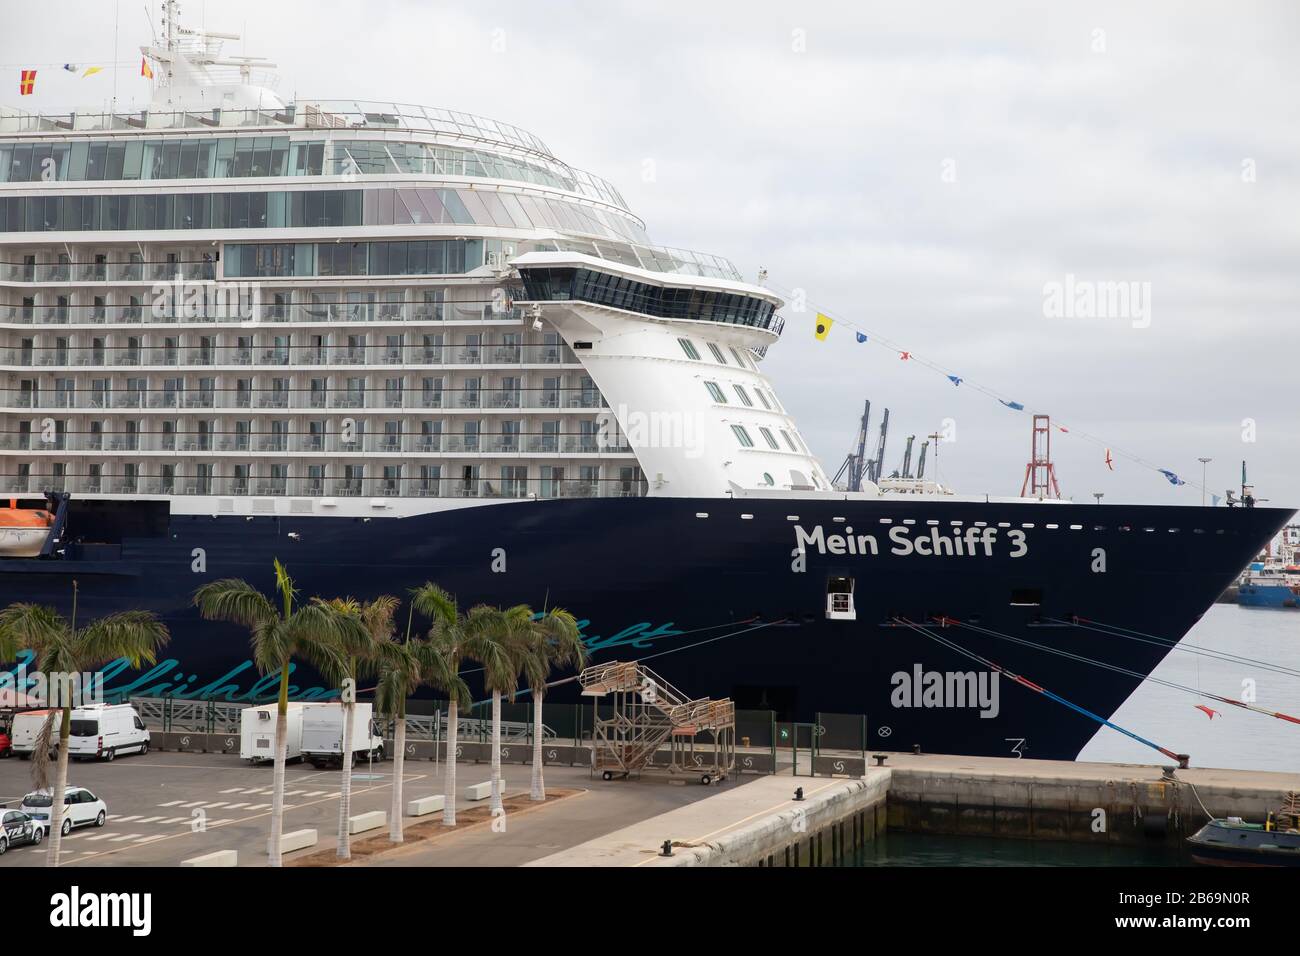 Mein Schiff 3 moored in Las Palmas, Gran Canaria, one of Spains Canary  Islands off Northwestern Africa Stock Photo - Alamy